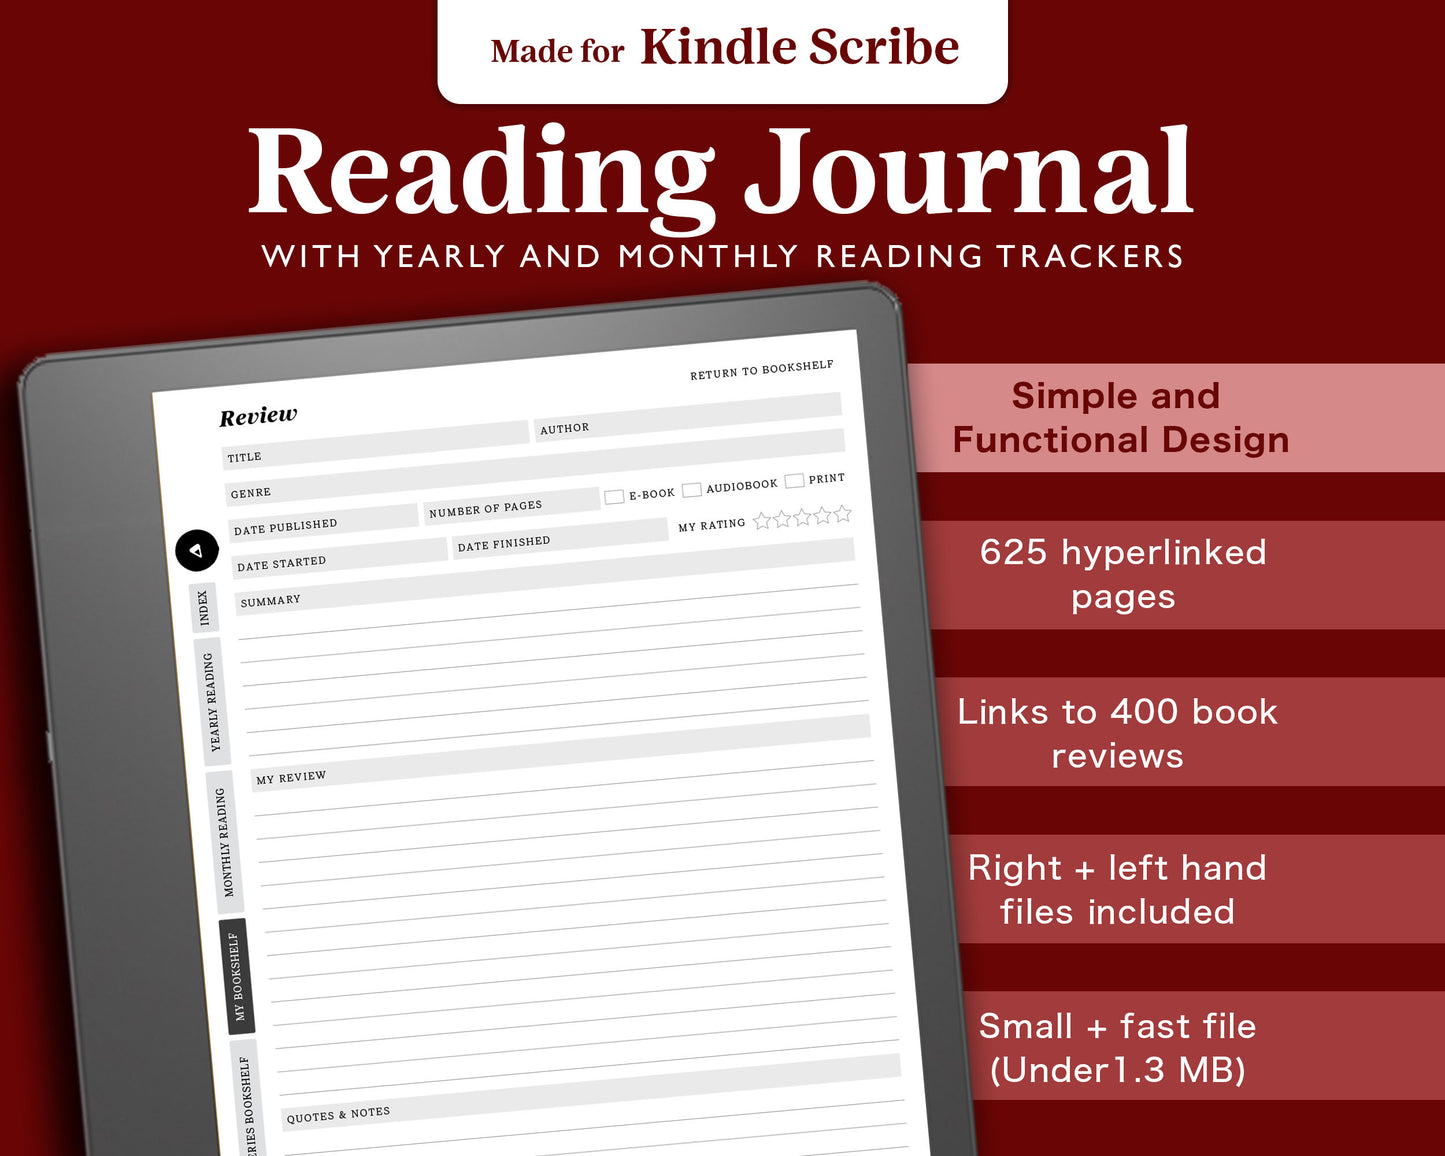 2023 Interactive Kindle Scribe Monthly Calendar Kindle Scribe